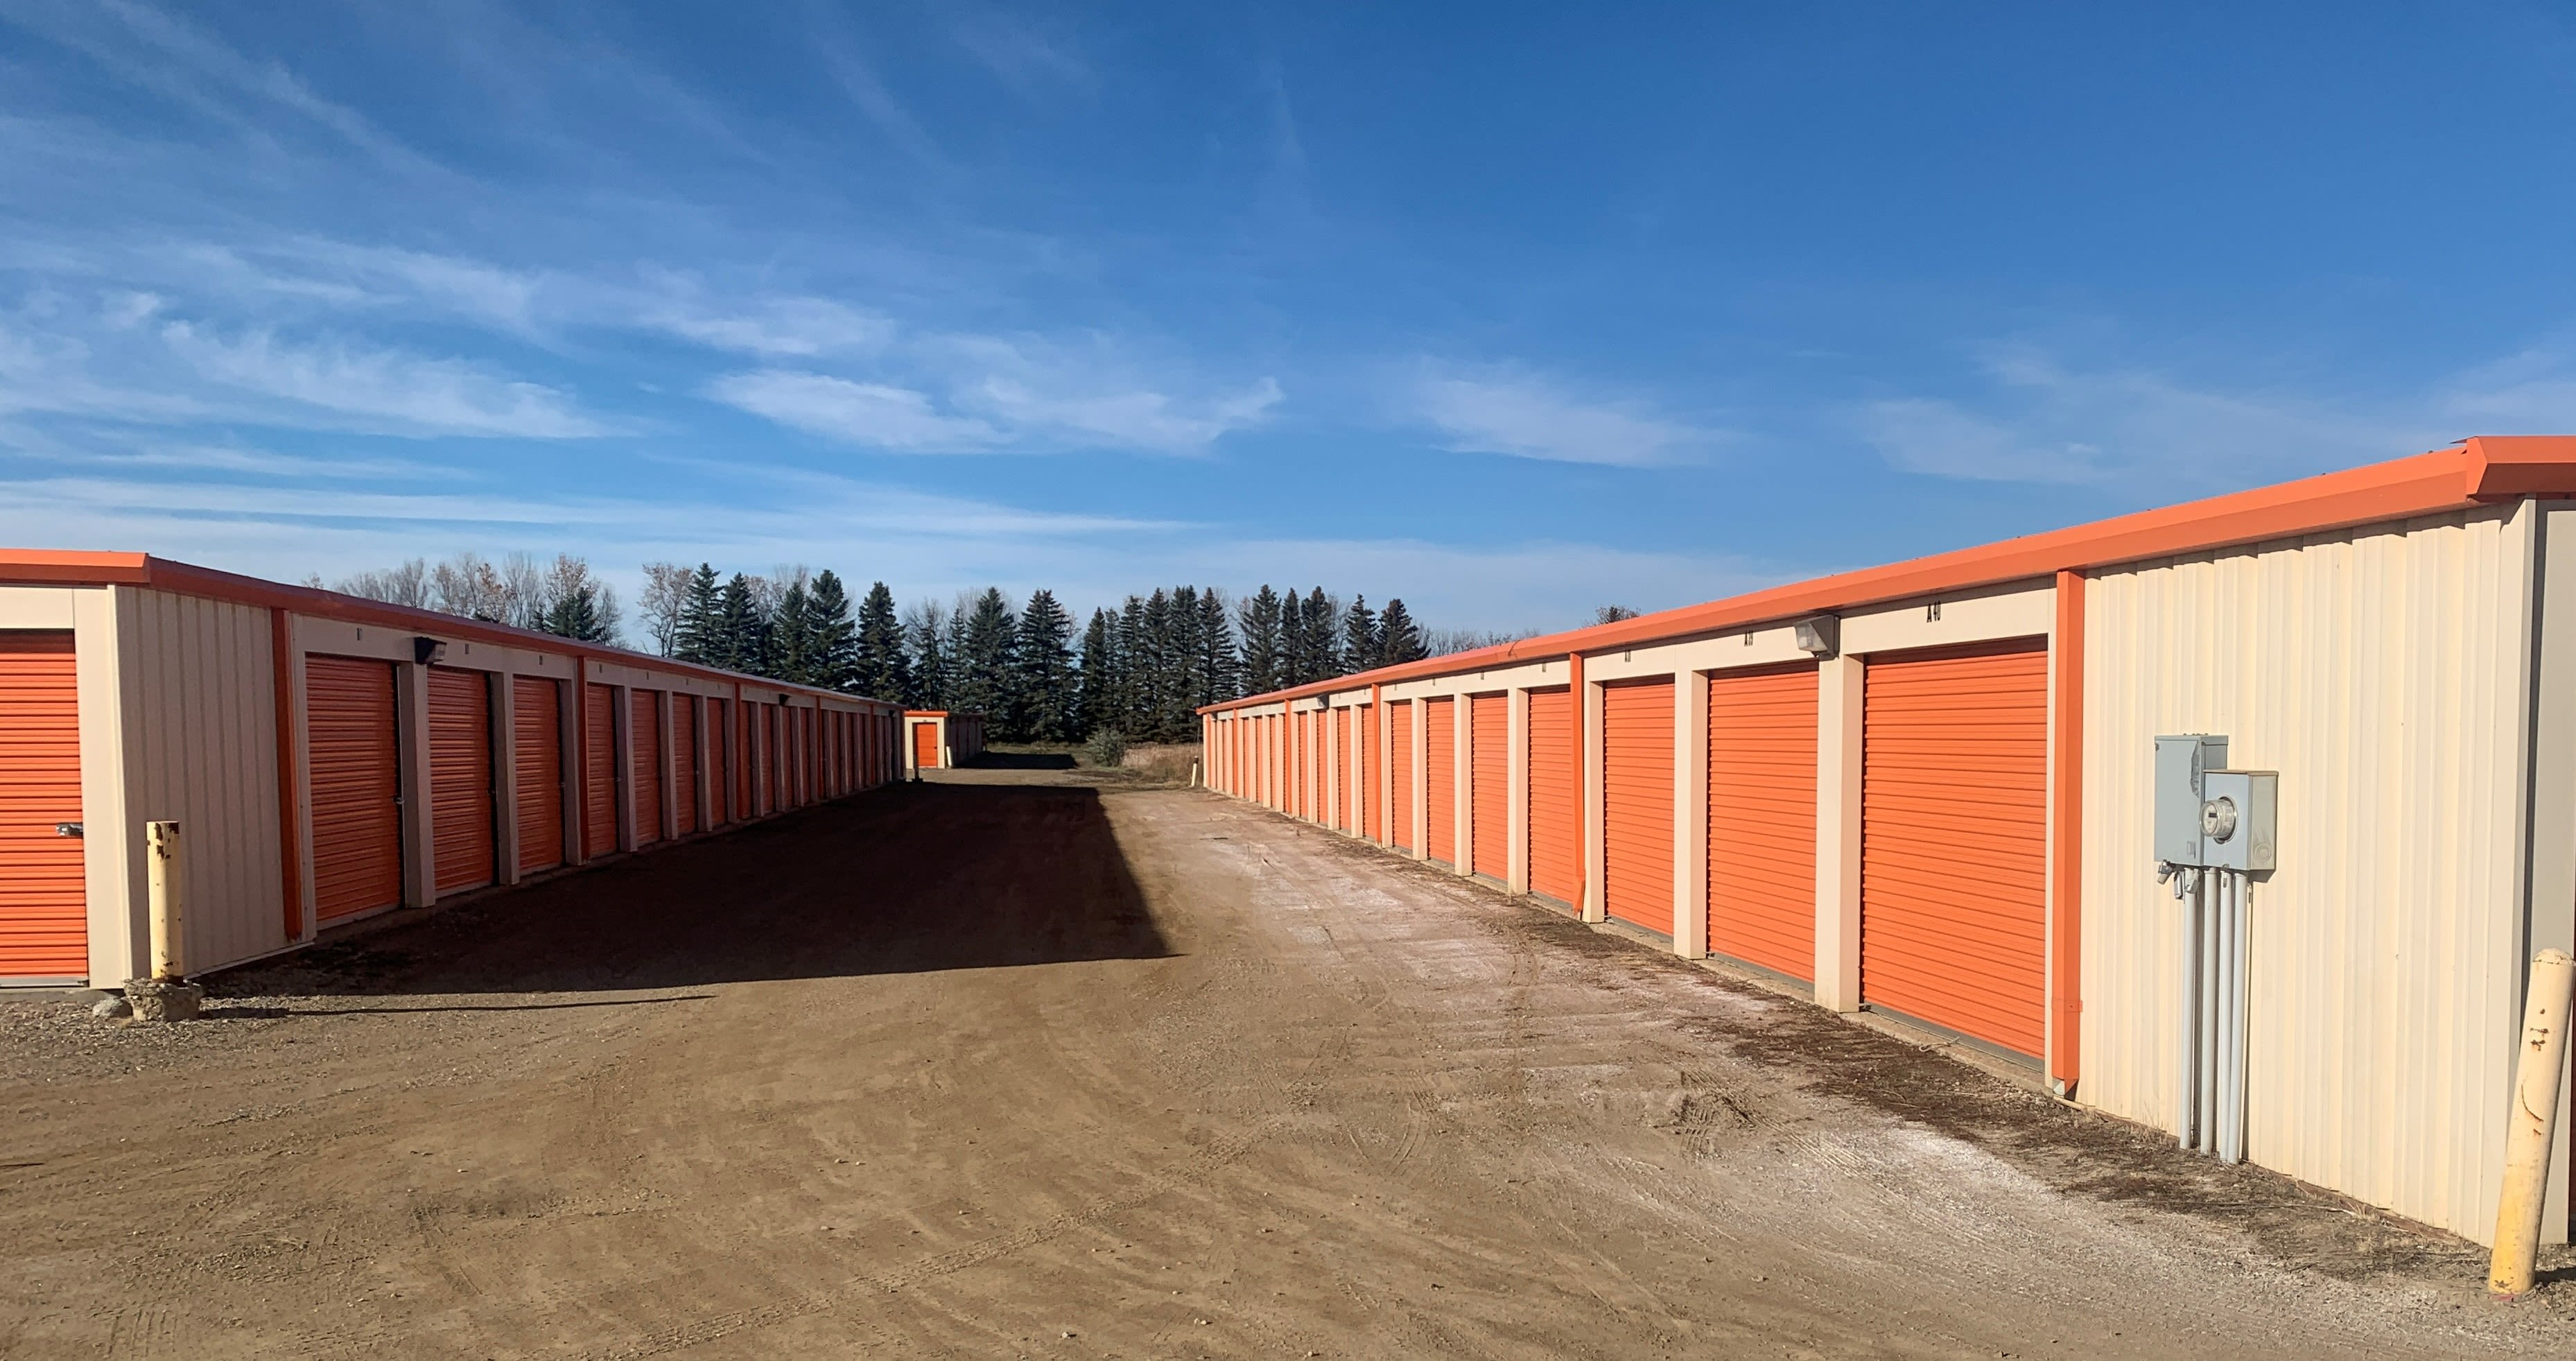 View our features at KO Storage in Minot, North Dakota